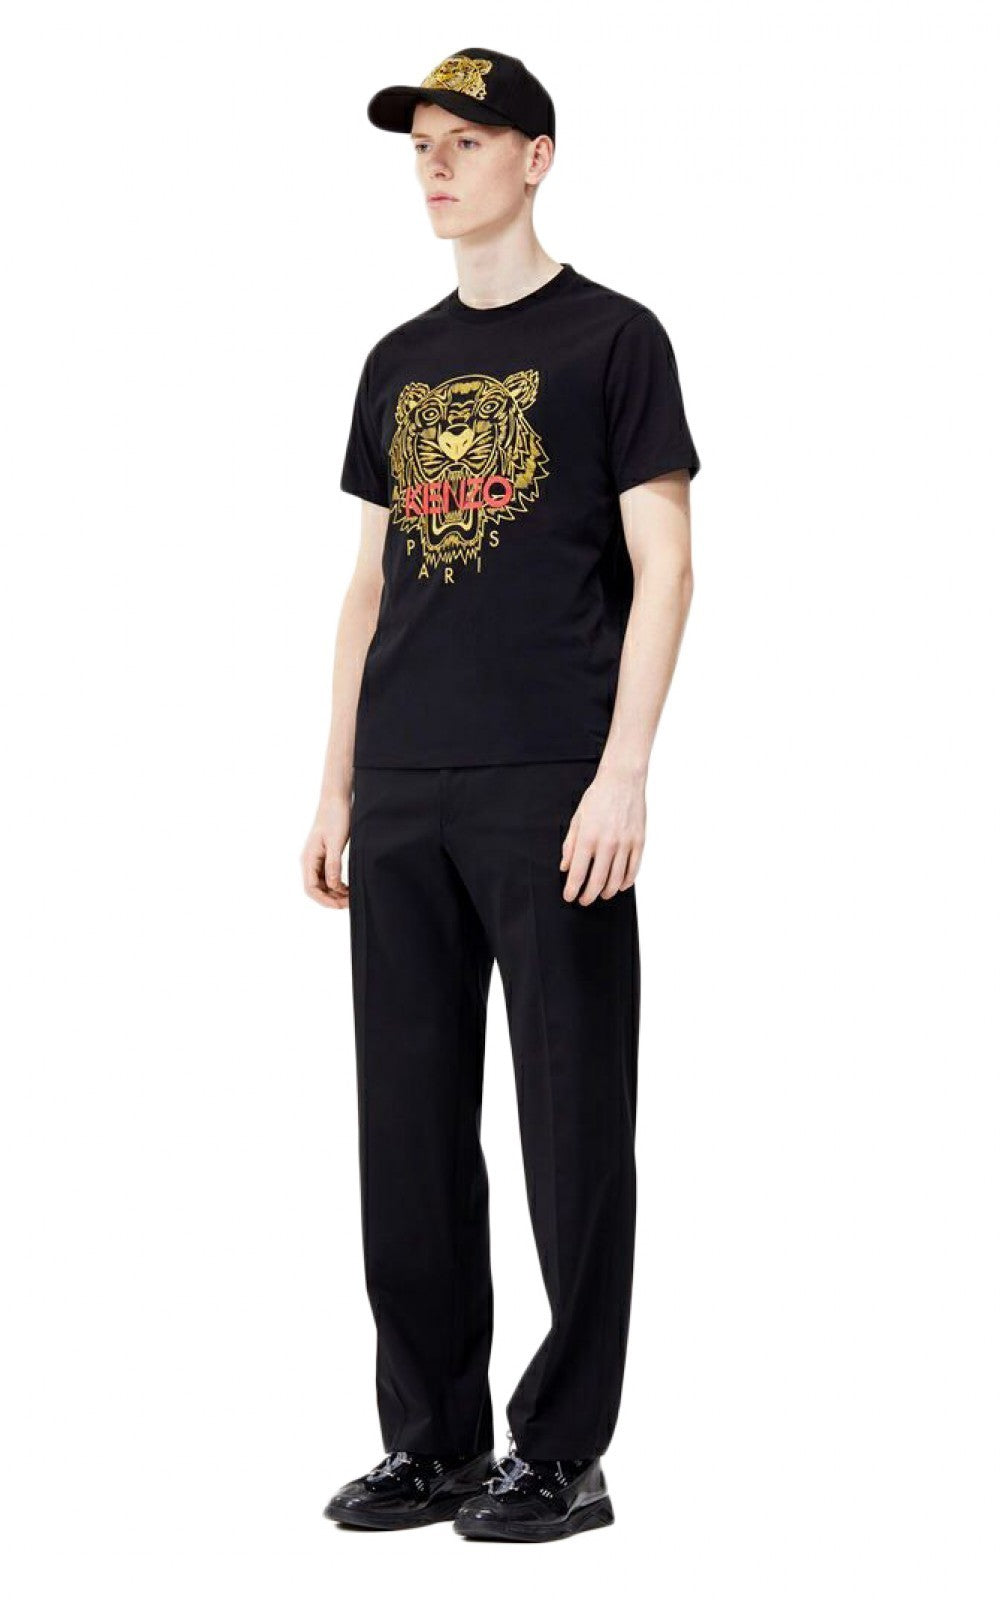 Kenzo Gold Tiger Logo T-Shirt - Shop Streetwear, Sneakers, Slippers and Gifts online | Malaysia - The Factory KL